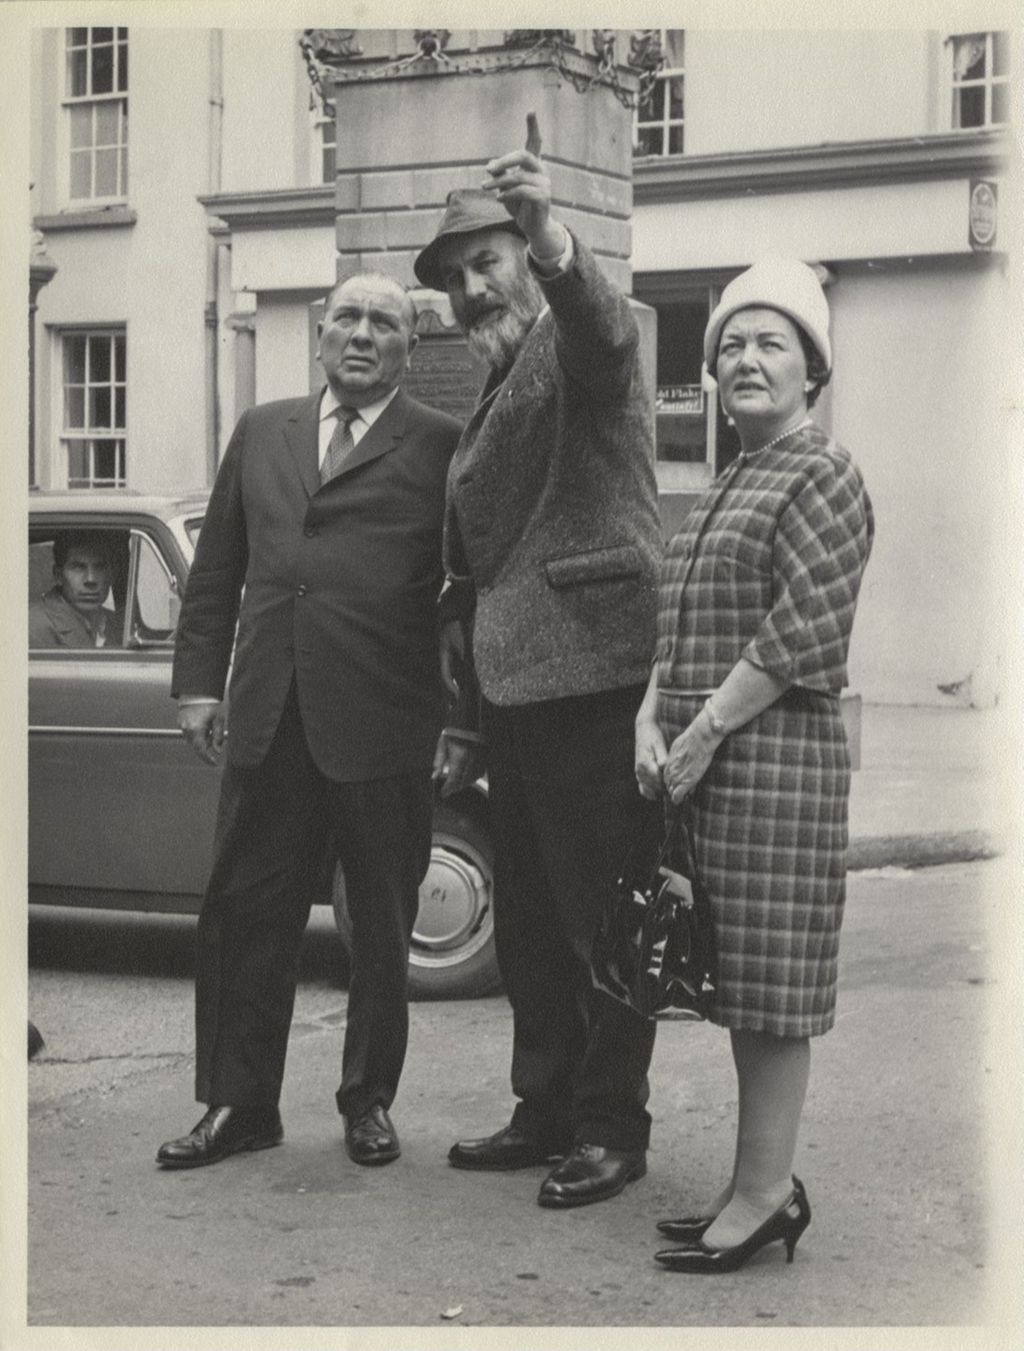 Miniature of Trip to Ireland, Richard J. and Eleanor Daley sightseeing with Dungarvan mayor